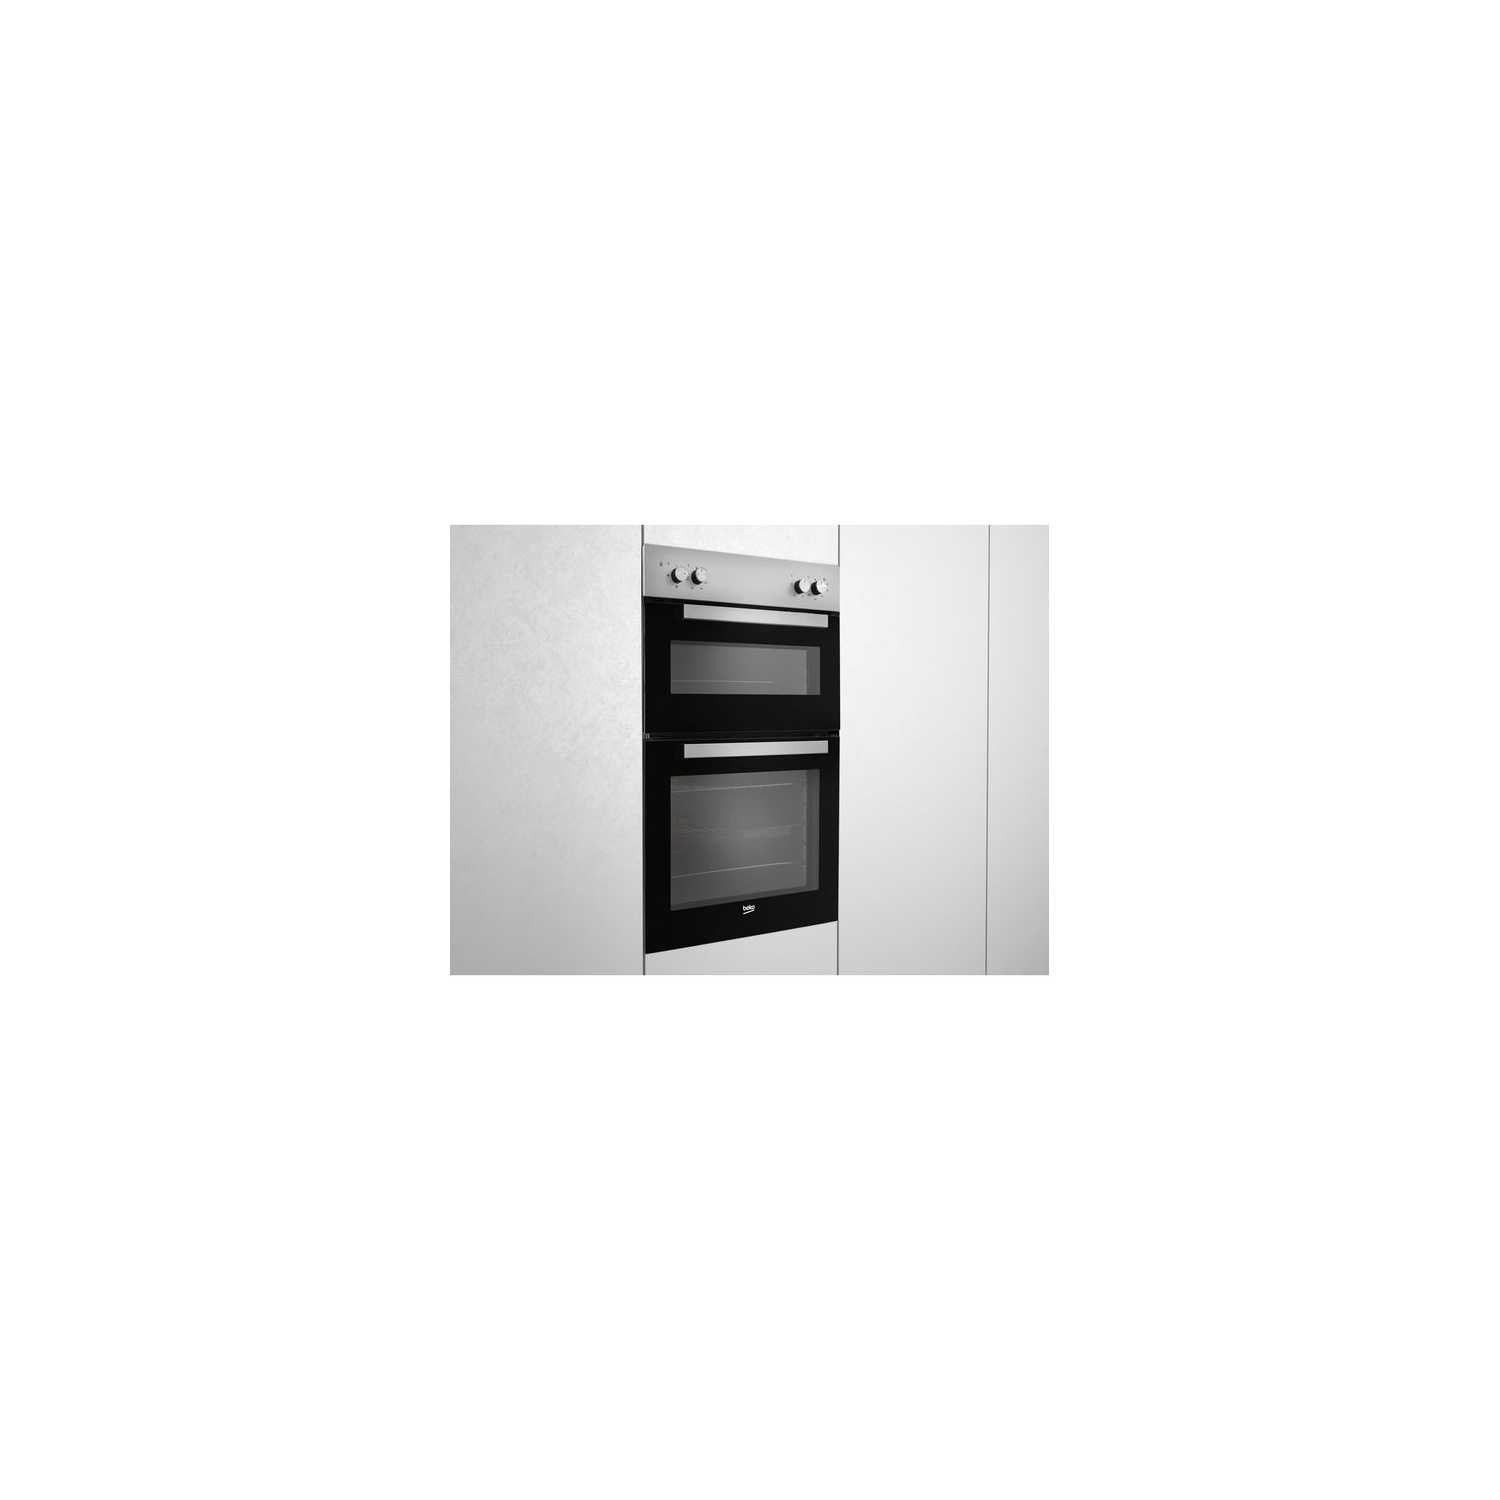 Beko Electric Double Oven - Silver - A Rated - 1